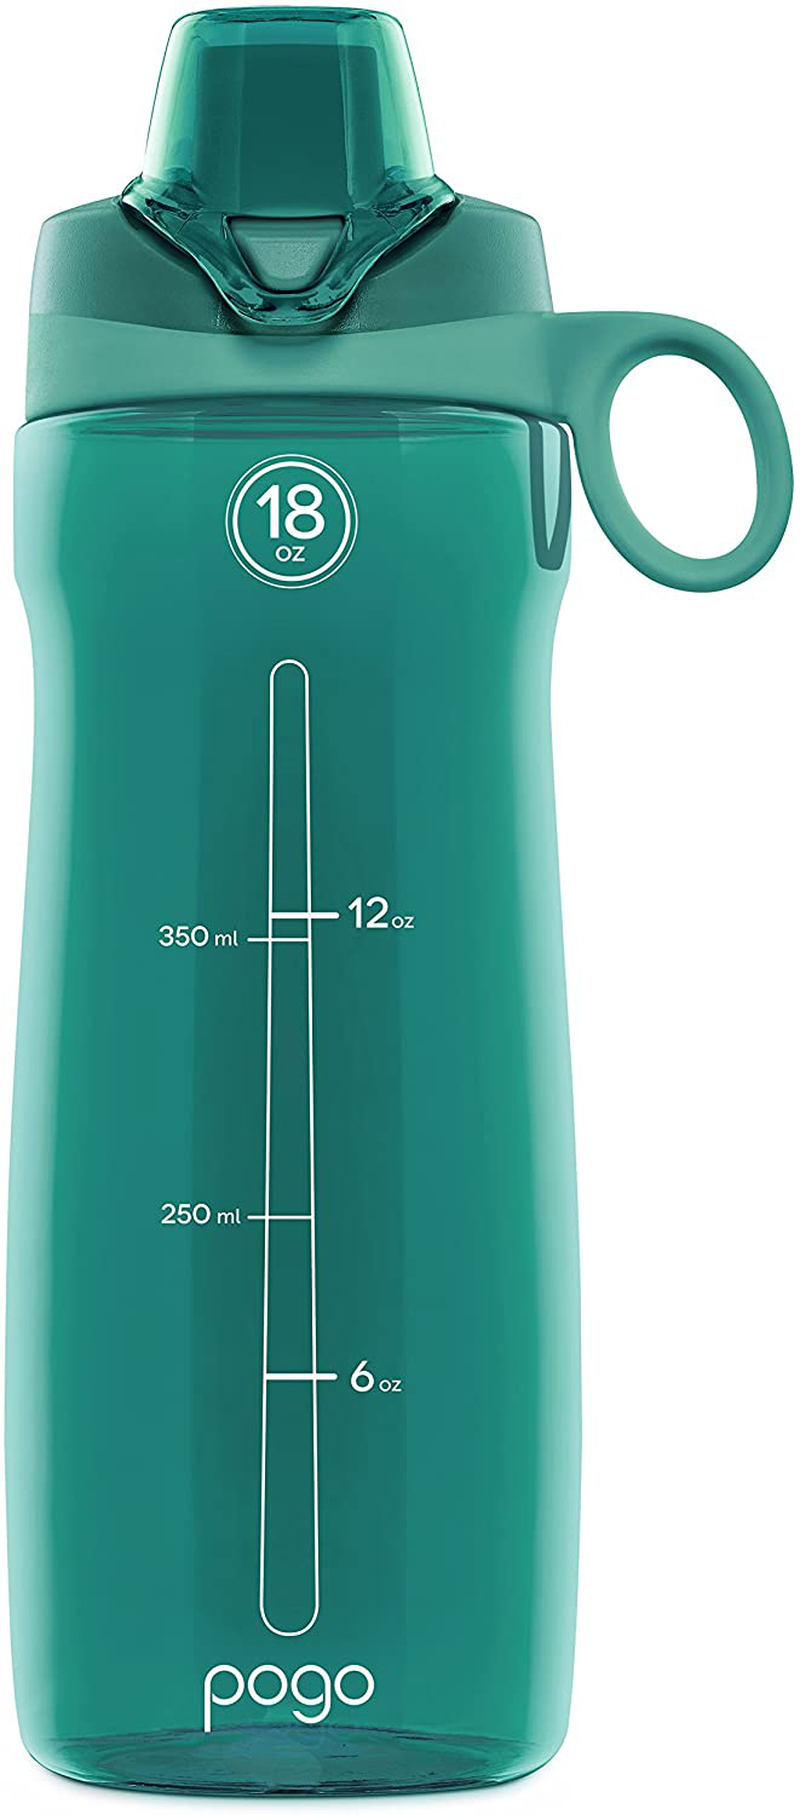 Pogo BPA-Free Plastic Water Bottle with Chug Lid, Teal, 40 oz